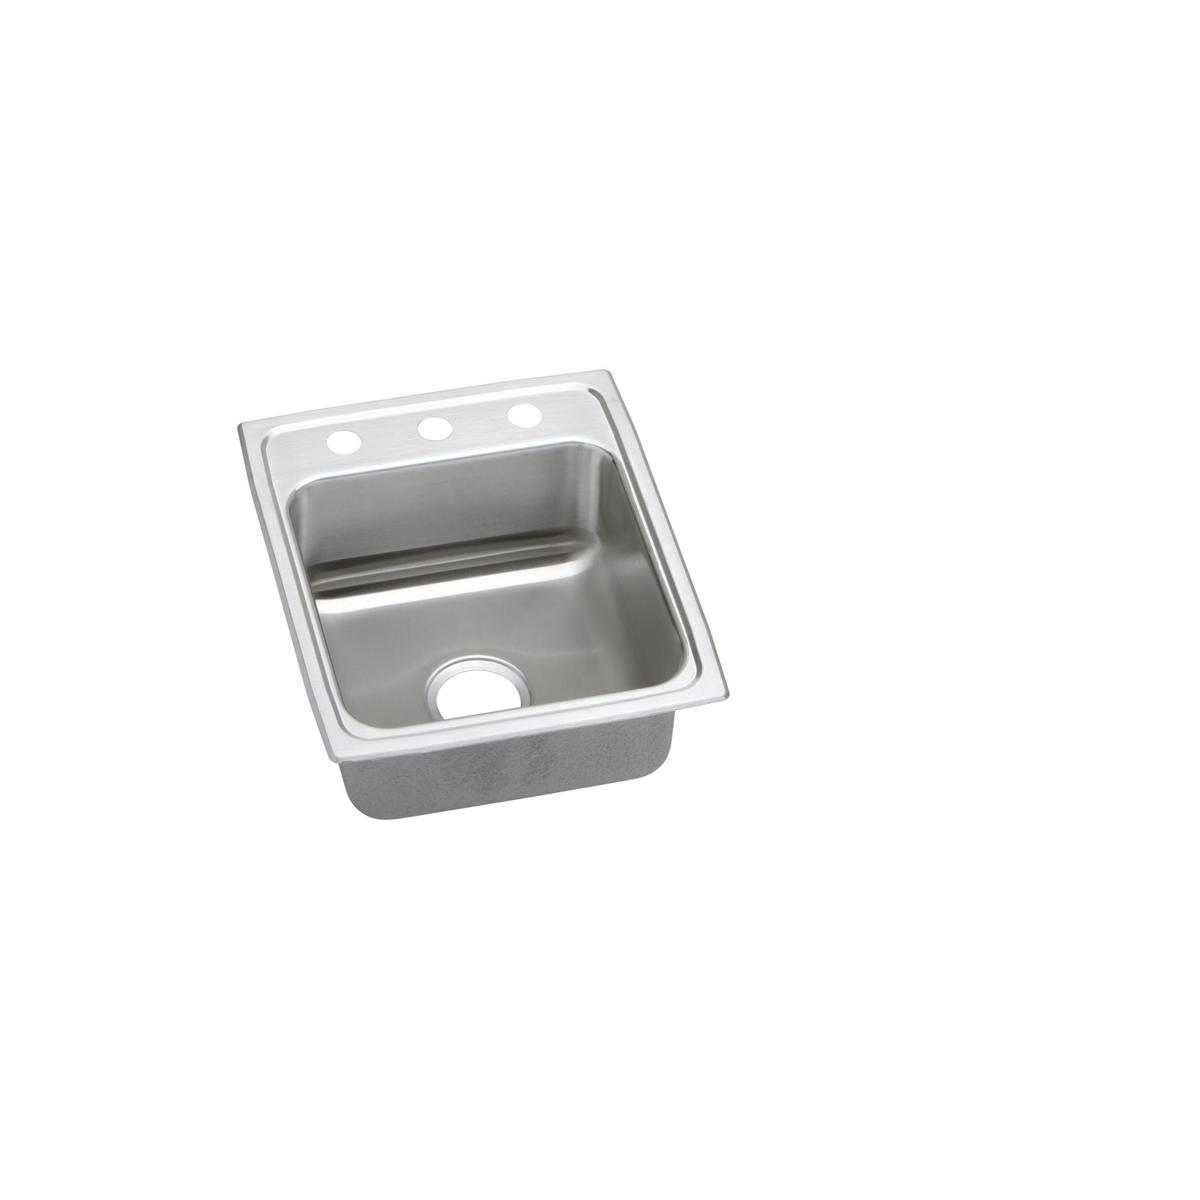 Elkay Lustertone Classic 17" x 20" x 5" Single Bowl Drop-in ADA Sink with Quick-clip